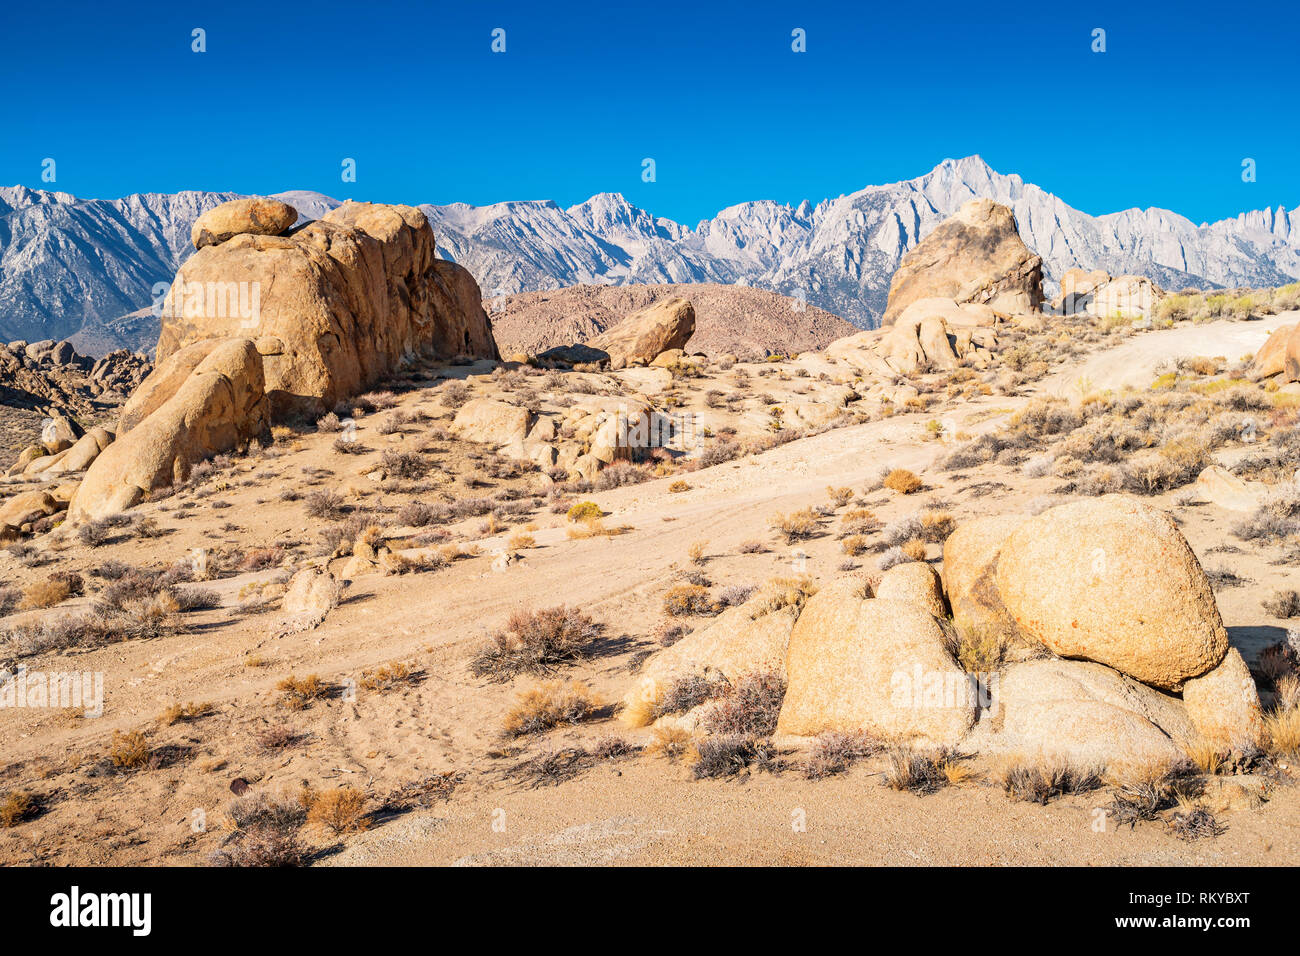 Dirt road leads through rock formations in the Alabama Hills, Lone Pine, California, USA. Stock Photo